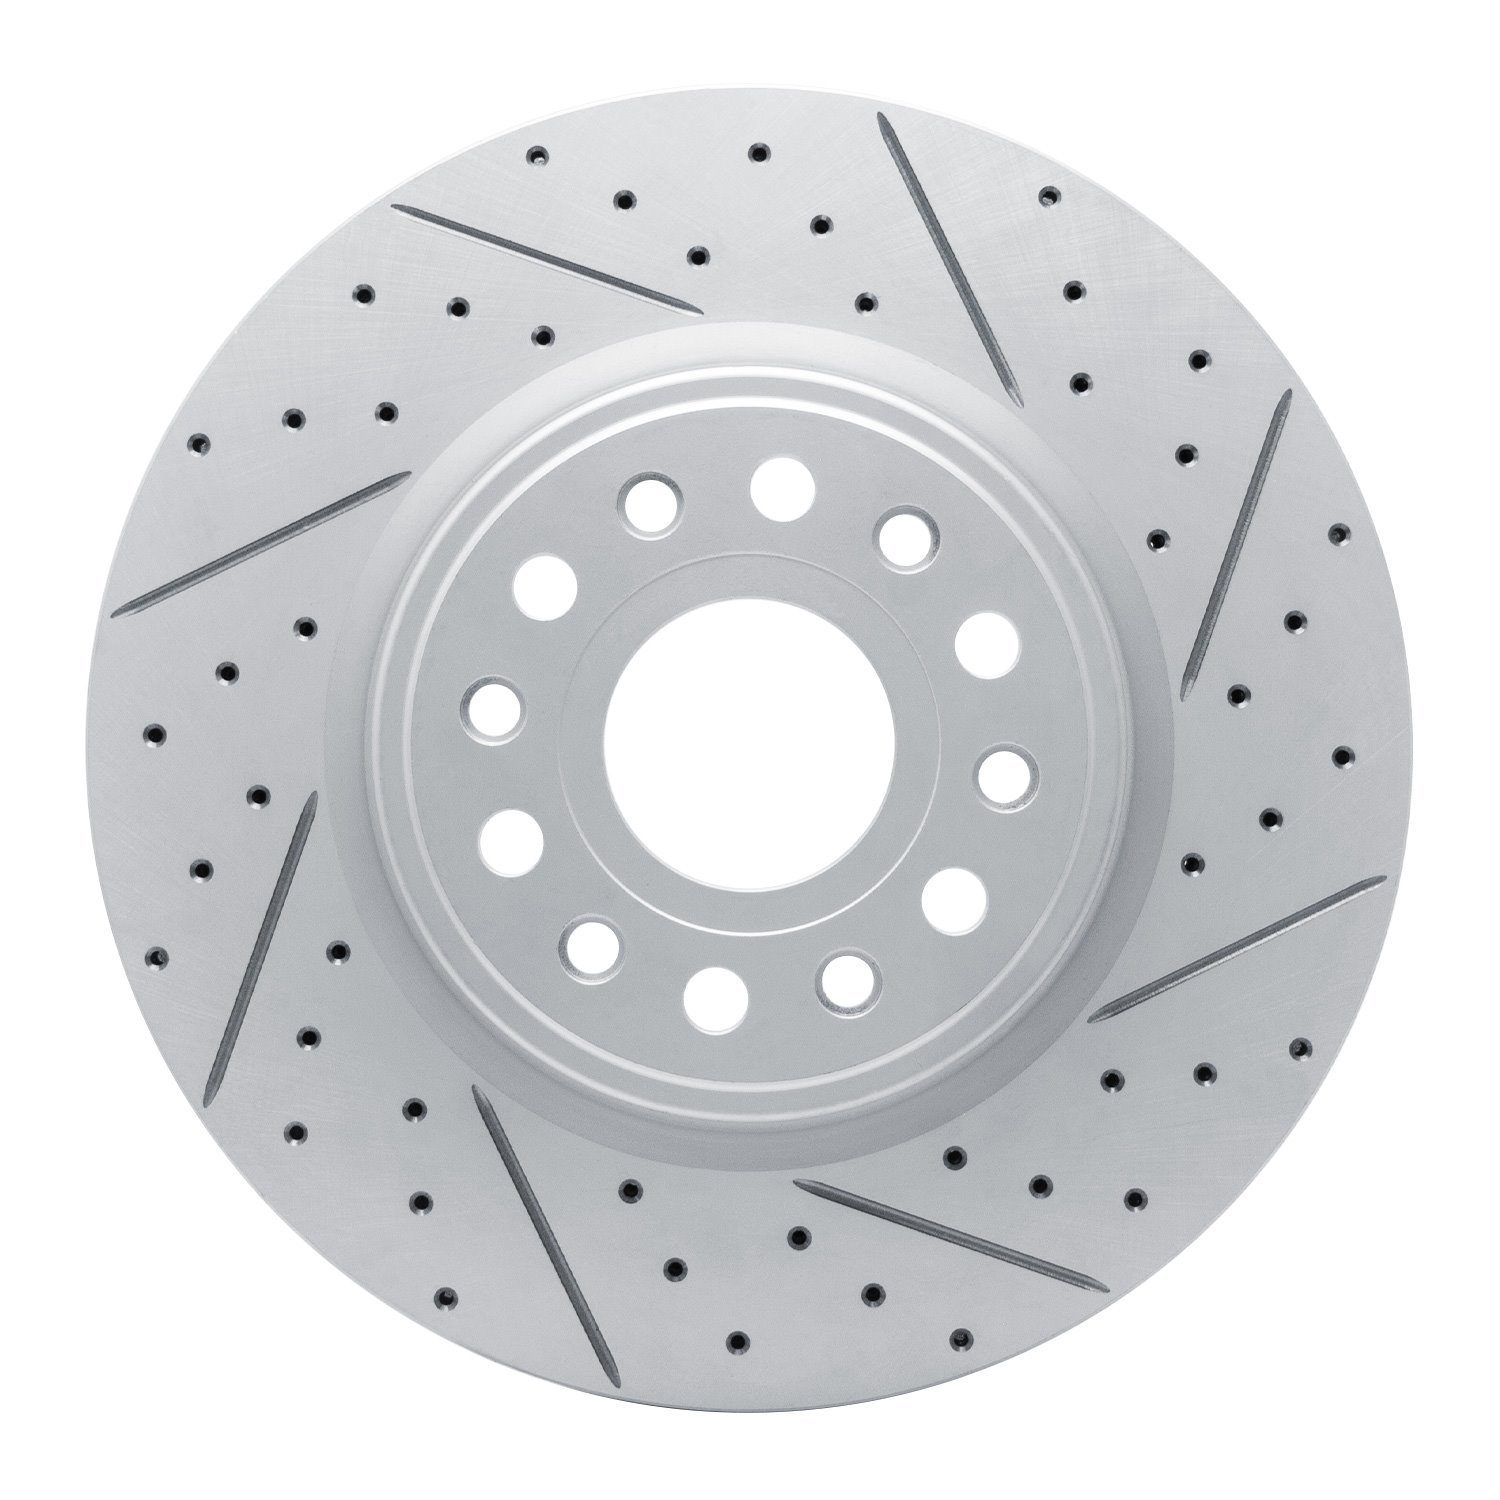 830-40120R Geoperformance Drilled/Slotted Brake Rotor, Fits Select Mopar, Position: Front Right